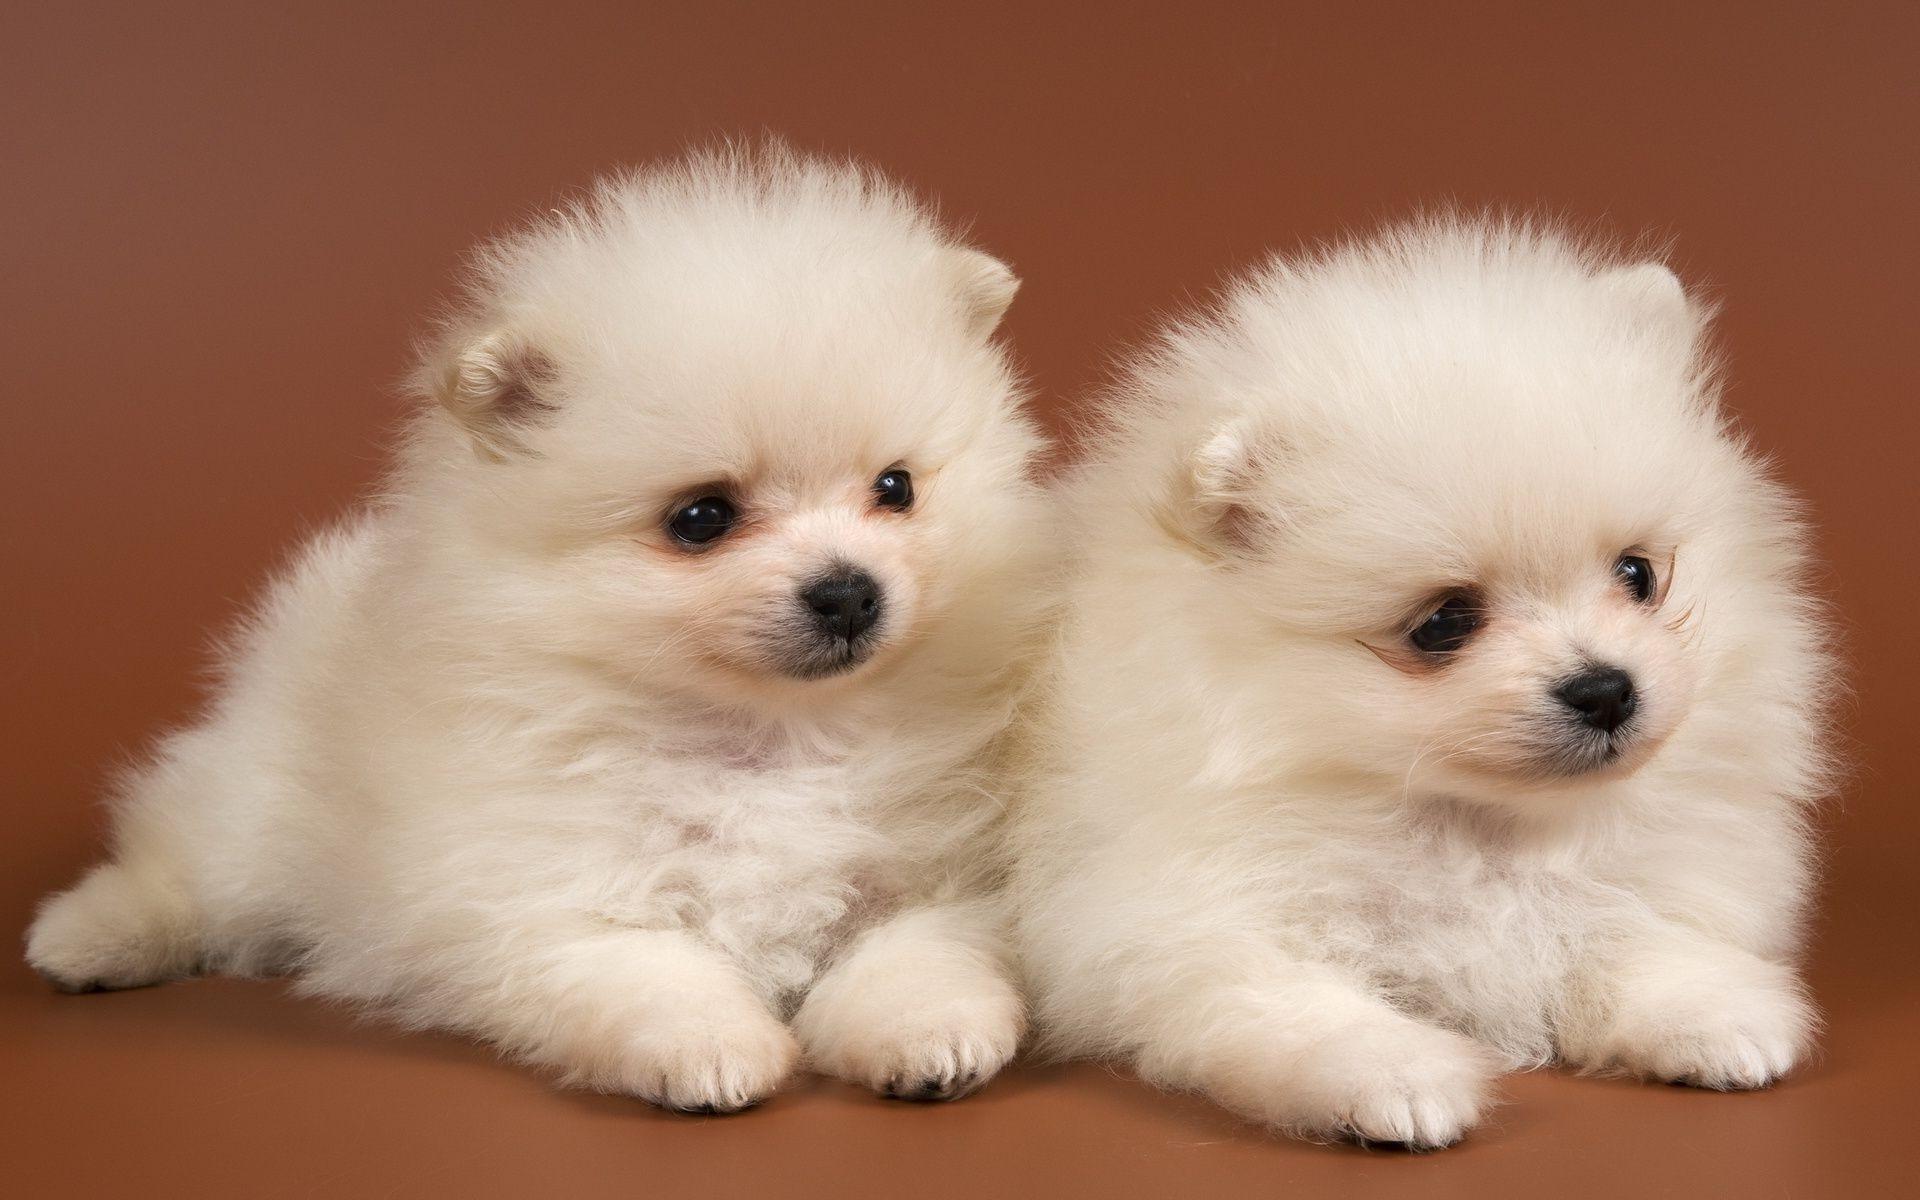 Fluffy puppies Chow Chow snow white. Android wallpaper for free